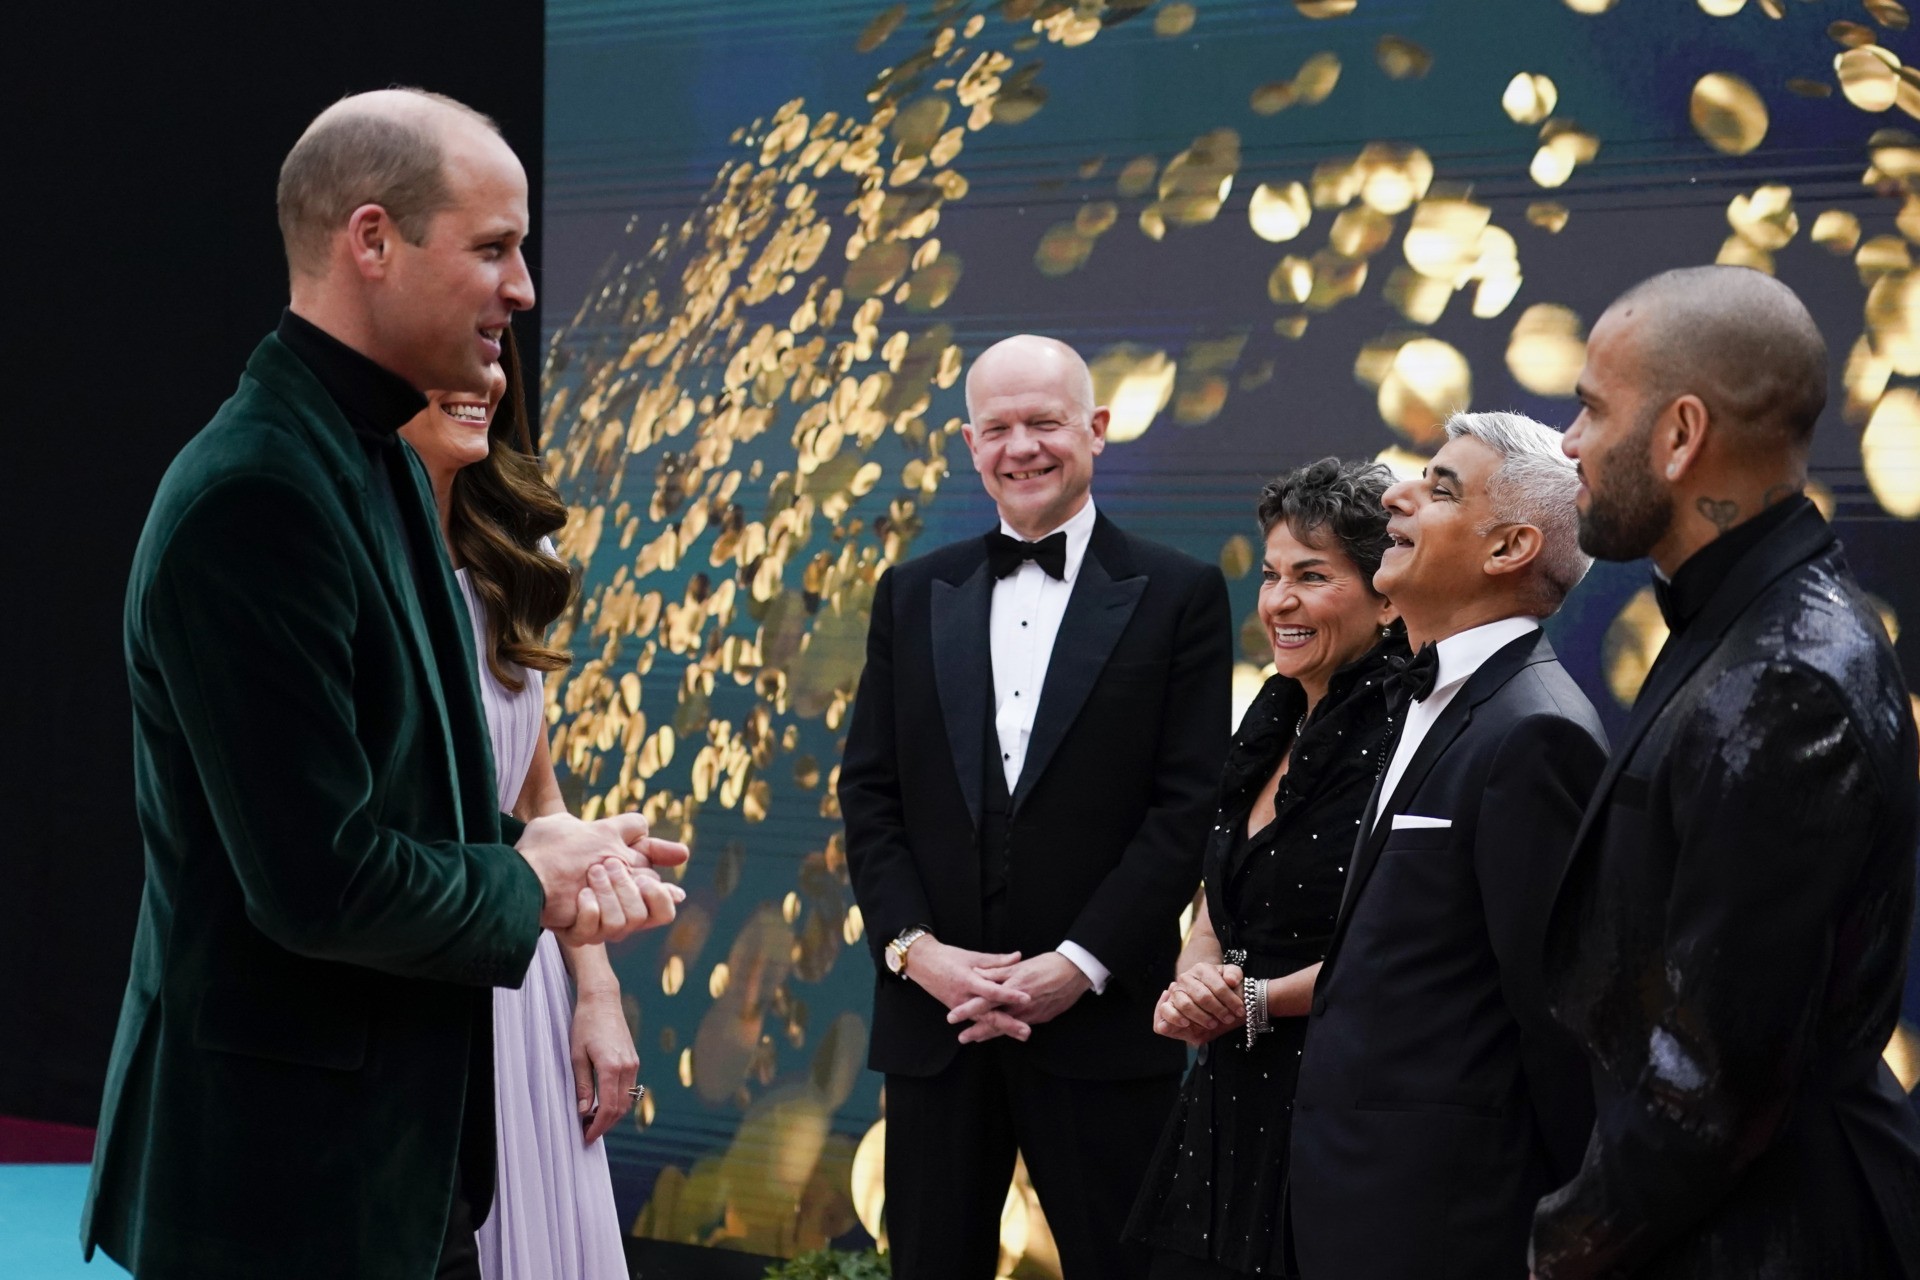 LONDON, ENGLAND - OCTOBER 17: Prince William, Duke of Cambridge and Catherine, Duchess of Cambridge speak with William Hague, Christiana Figueres, London Mayor Sadiq Khan and footballer Dani Alves during the 2021 Earthshot Prize Awards Ceremony at Alexandra Palace on October 17, 2021 in London, England. (Photo by Alberto Pezzali - WPA Pool/Getty Images)